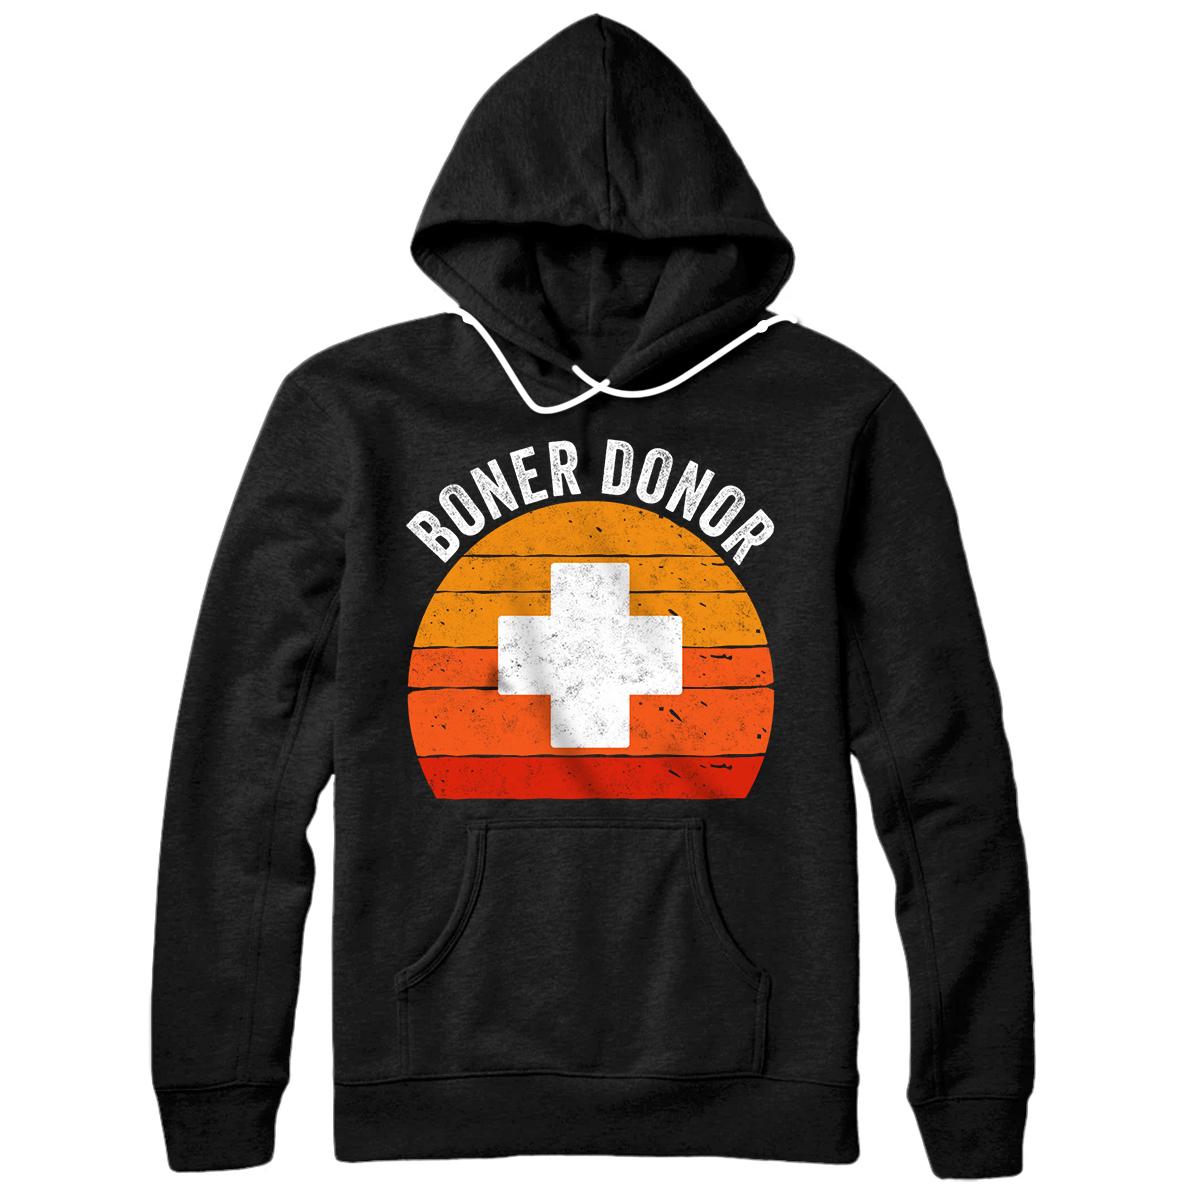 Personalized Funny Halloween Costume Gift Boner Donor Pullover Hoodie